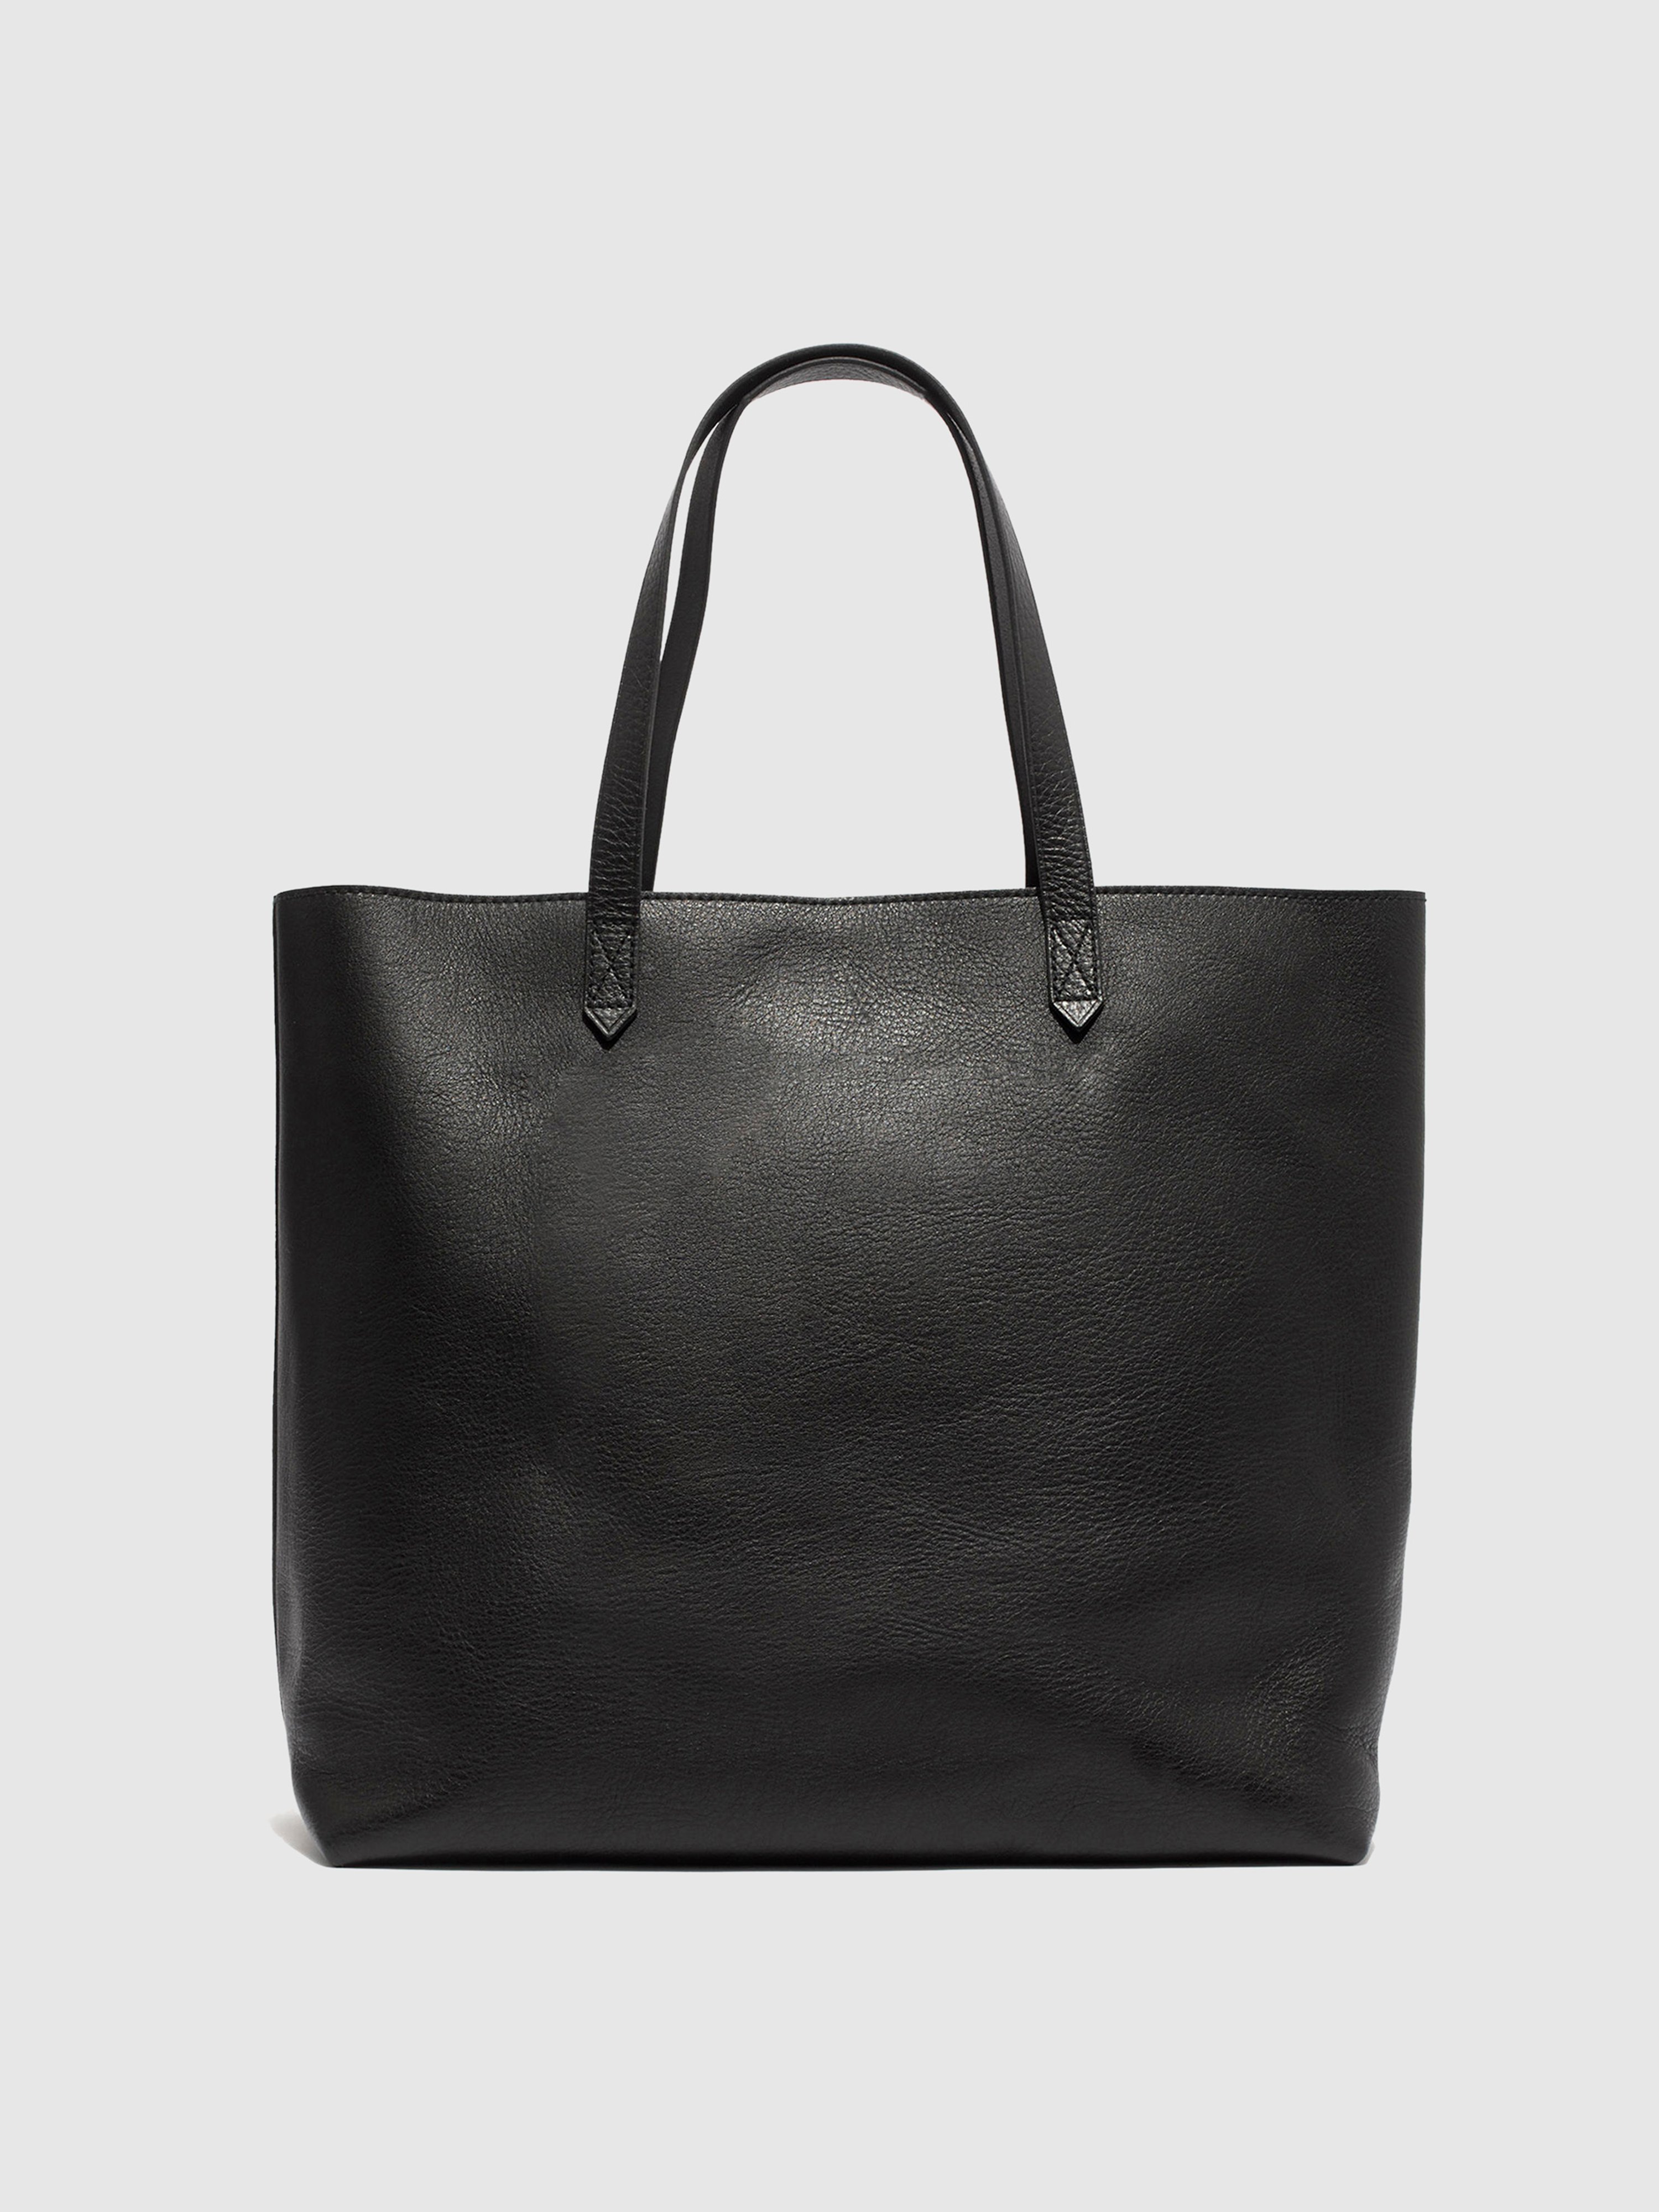 MADEWELL MADEWELL THE ZIP TOP TRANSPORT TOTE